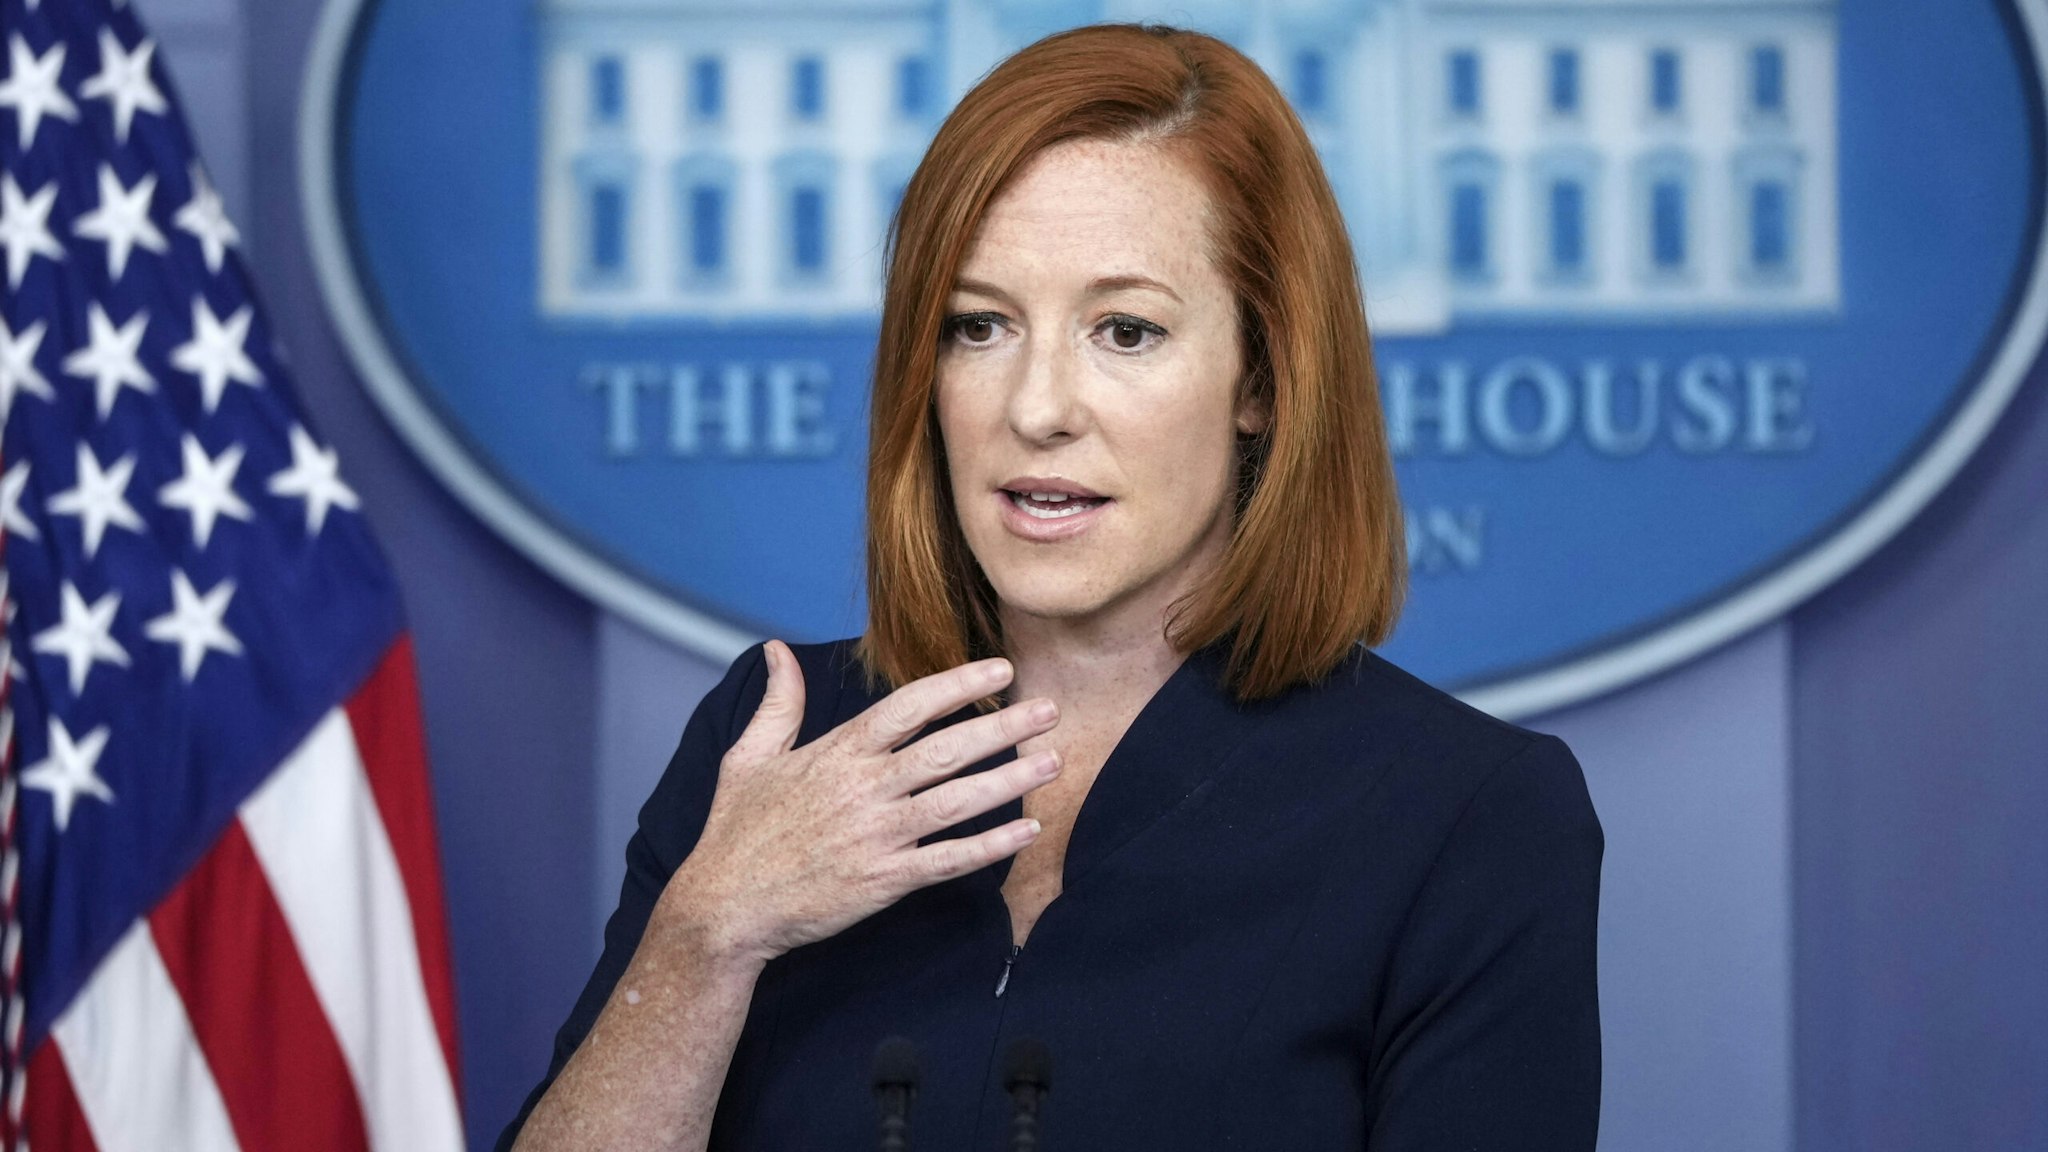 WASHINGTON, DC - JULY 23: White House Press Secretary Jen Psaki speaks during the daily press briefing at the White House on July 23, 2021 in Washington, DC. Later on Friday, President Joe Biden will participate in a campaign event for Virginia gubernatorial candidate Terry McAuliffe.